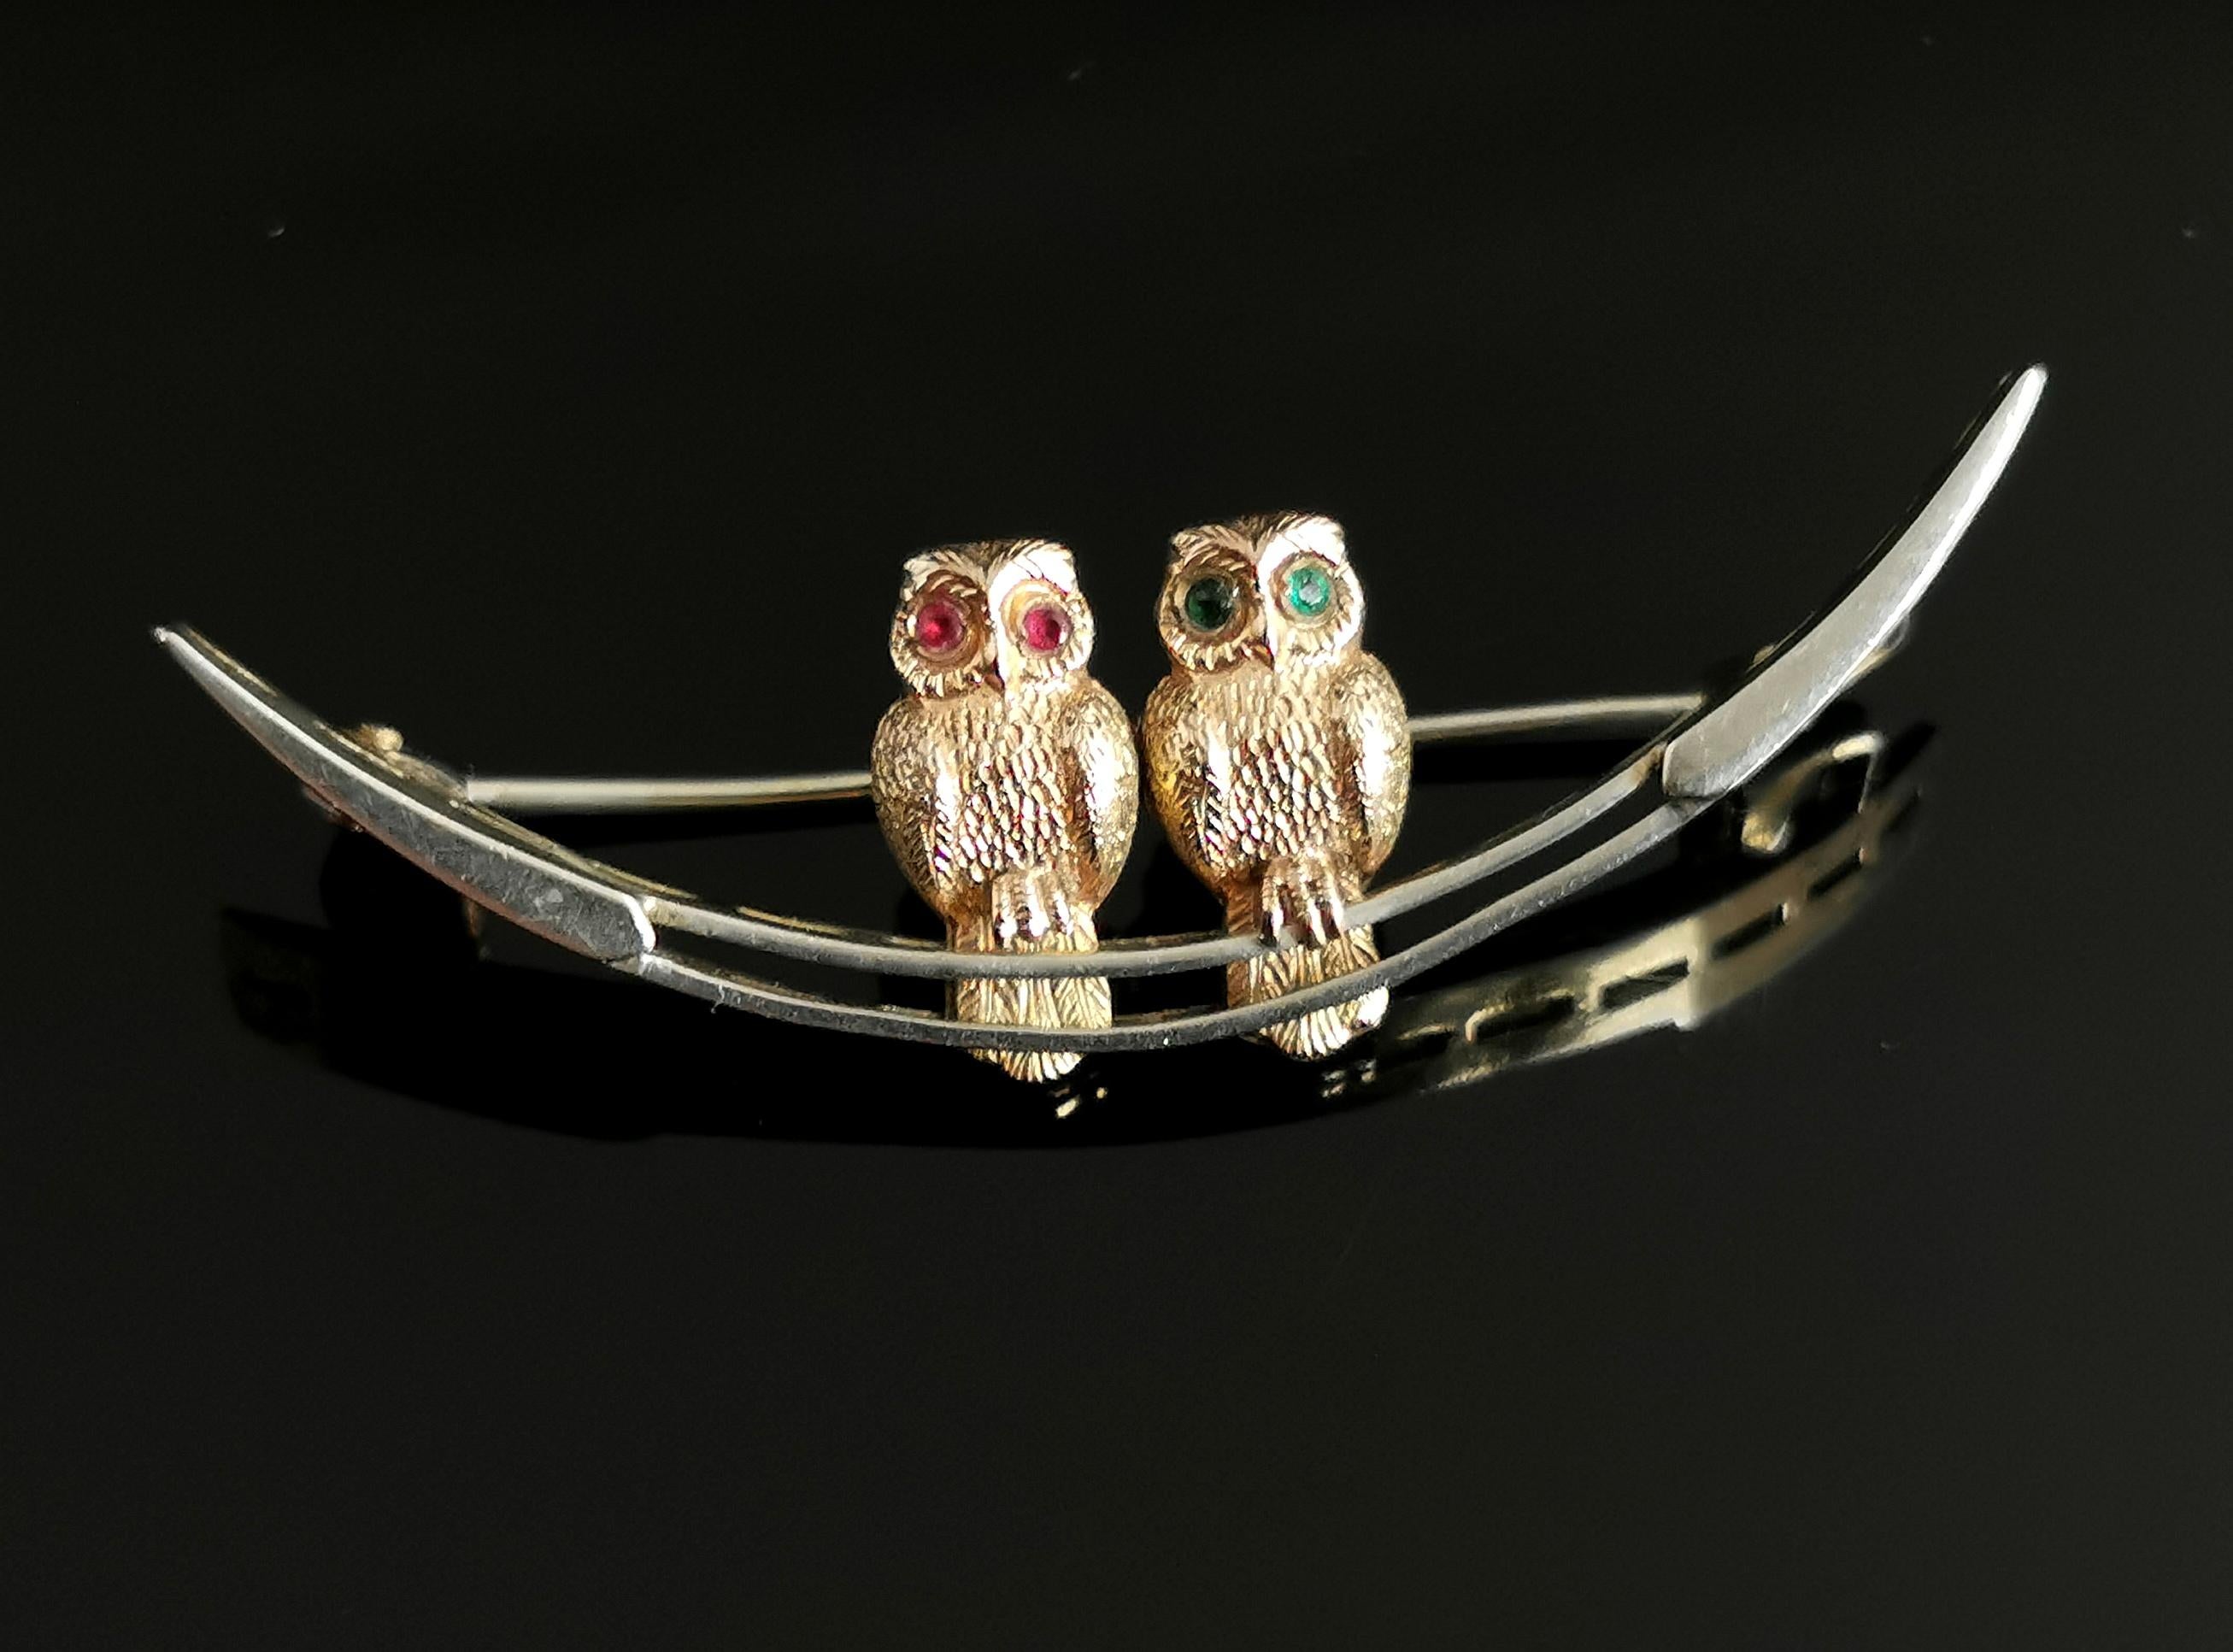 A superb antique Edwardian era, silver, gold and paste crescent brooch.

A beautiful piece it features two owls sitting on top of an open silver crescent moon.

The owls are finished with an applied 9kt gold front and both have paste stone eyes in